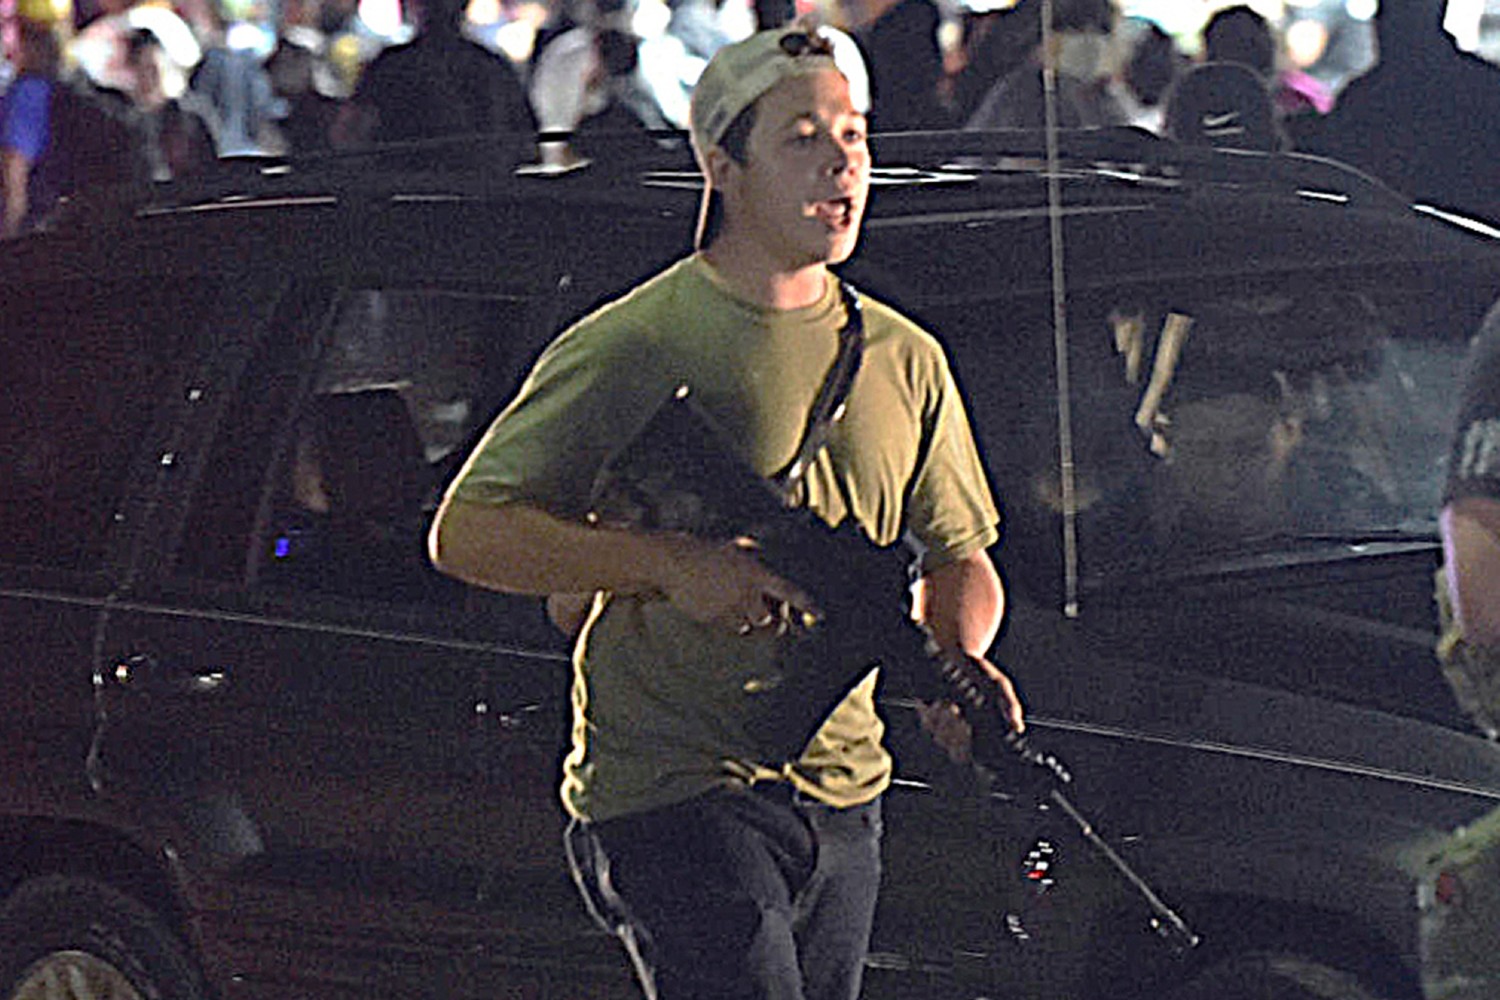 FILE - In this Tuesday, Aug. 25, 2020 file photo, Kyle Rittenhouse carries a weapon as he walks along Sheridan Road in Kenosha, Wis., during a night of unrest following the weekend police shooting of Jacob Blake. Rittenhouse, a 17-year-old accused of killing two protesters days after Jacob Blake was shot by police in Kenosha, Wisconsin, faces a hearing Friday, Sept. 25, 2020 on whether he should be sent to Wisconsin to stand trial on homicide charges that could put him in prison for life. (Adam Rogan/The Journal Times via AP, File)